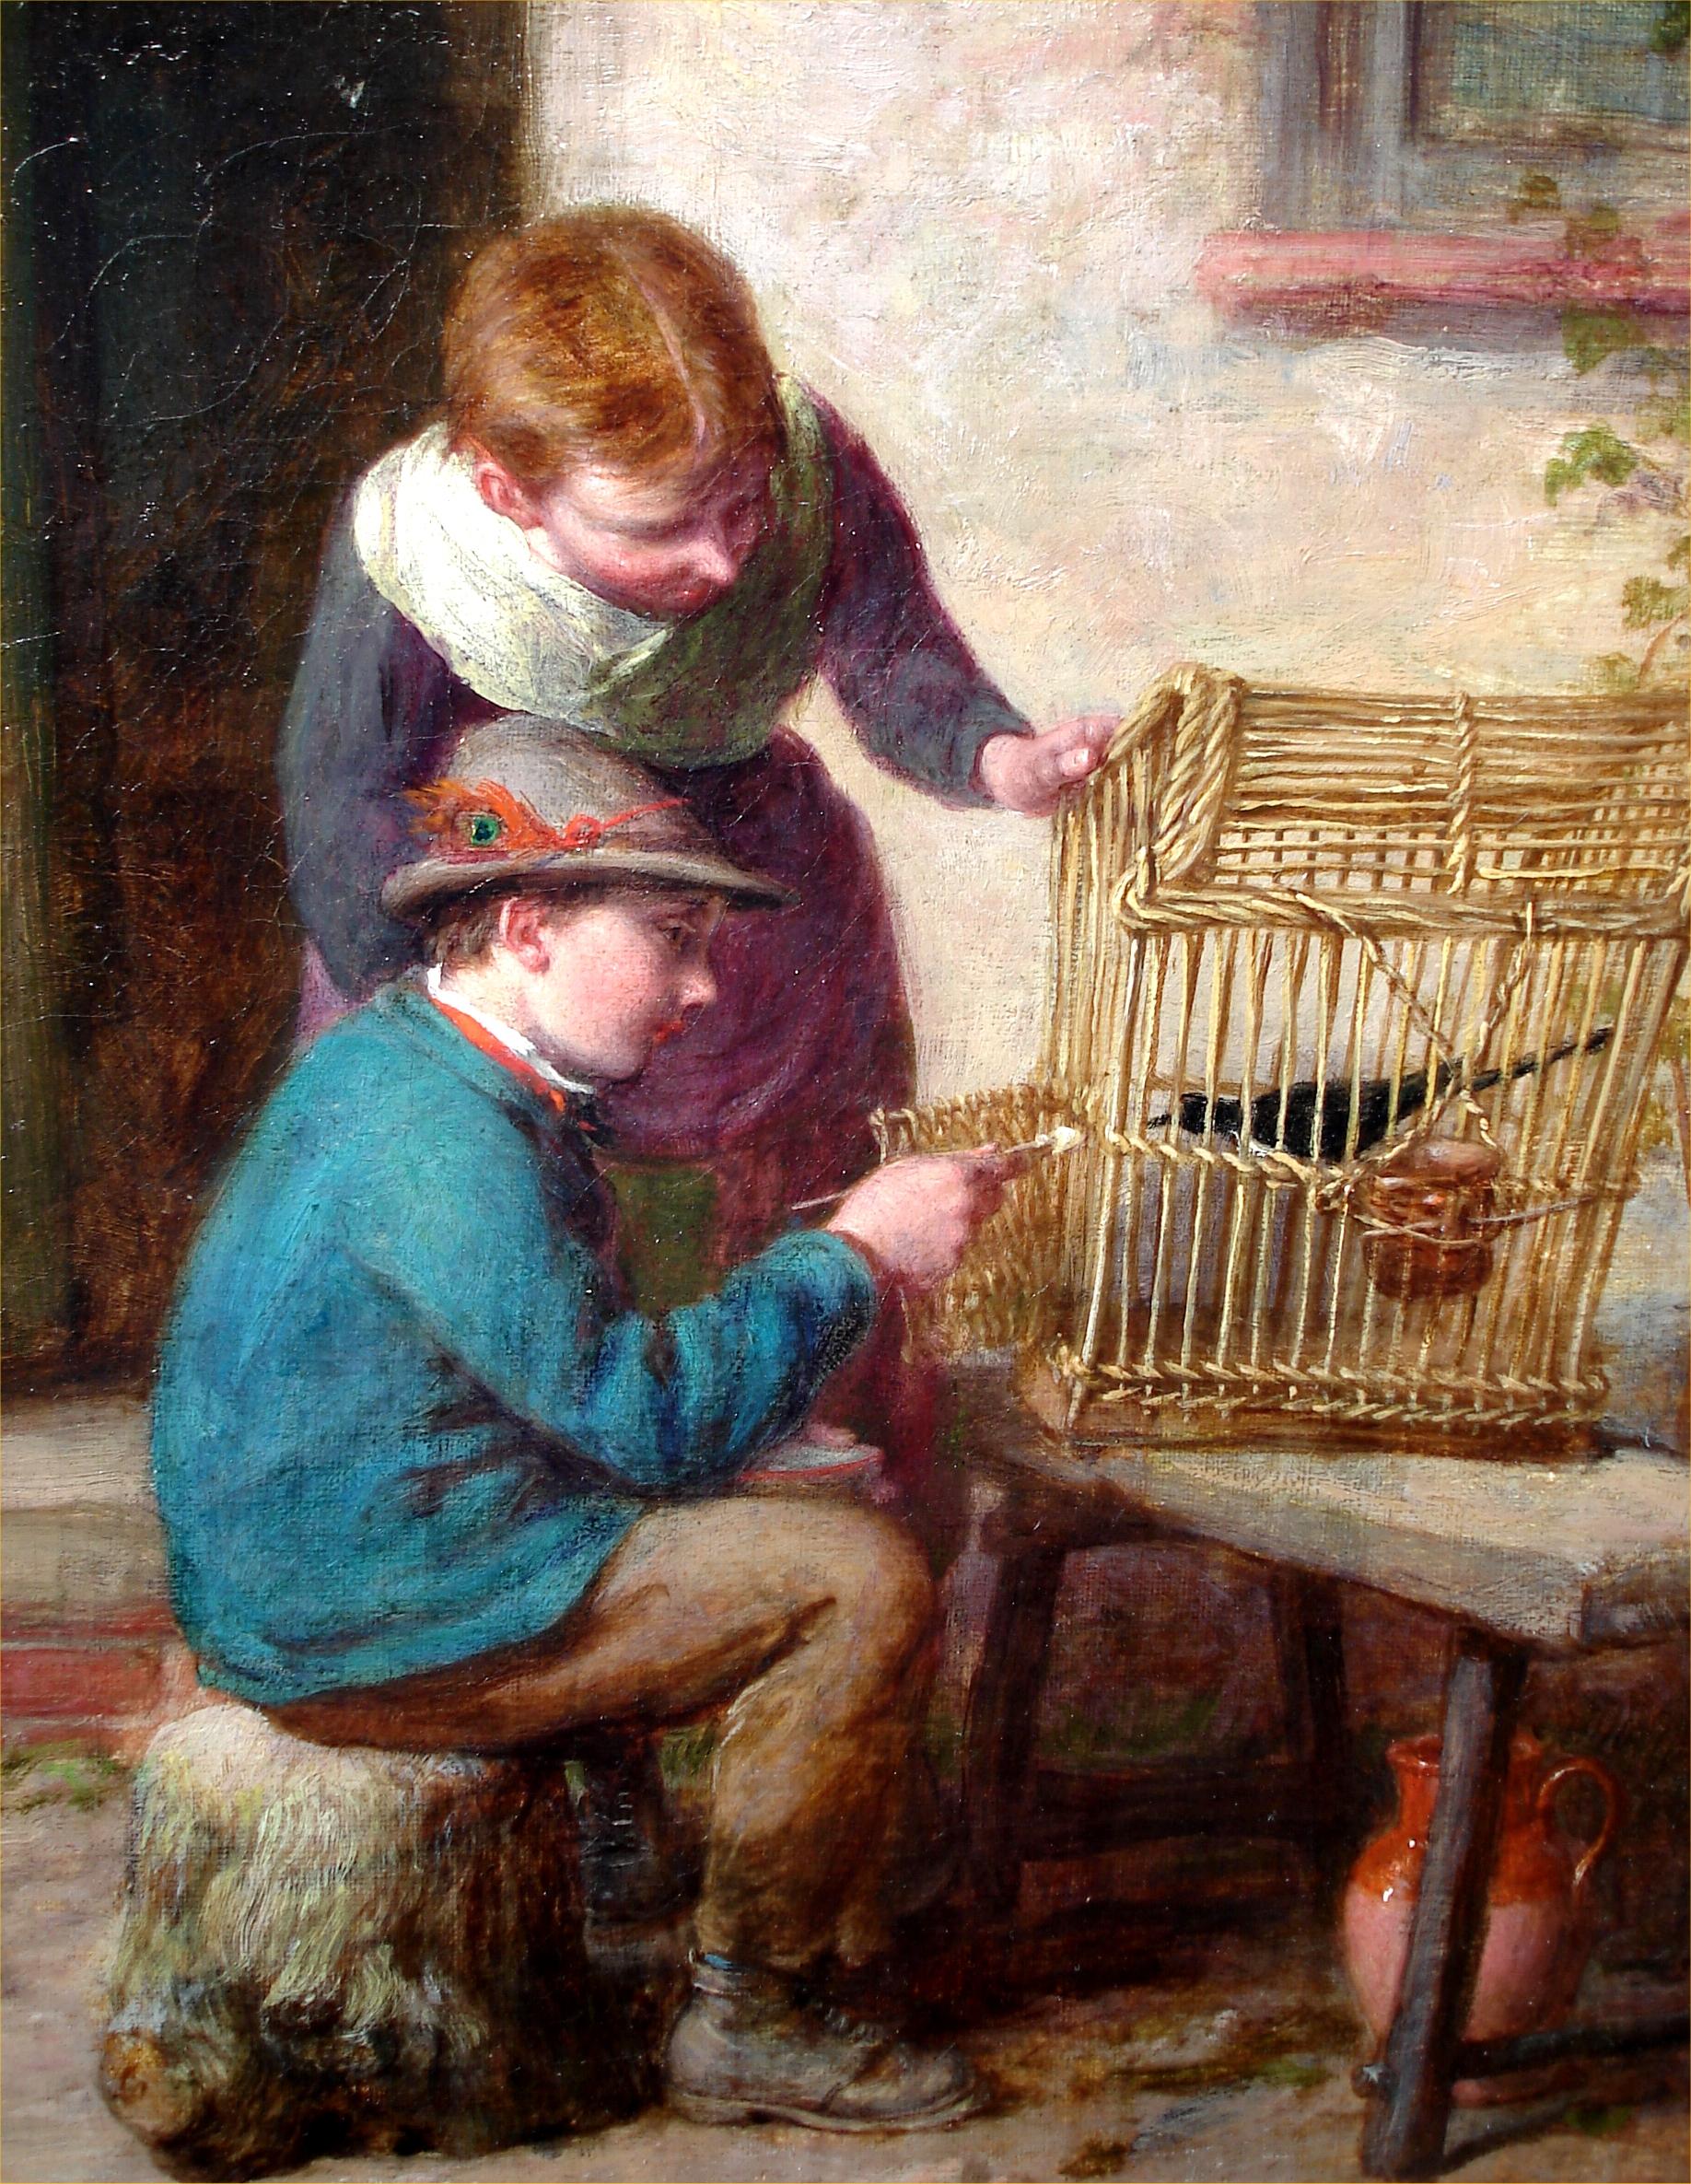 A Caring Hand - Painting by William Bromley